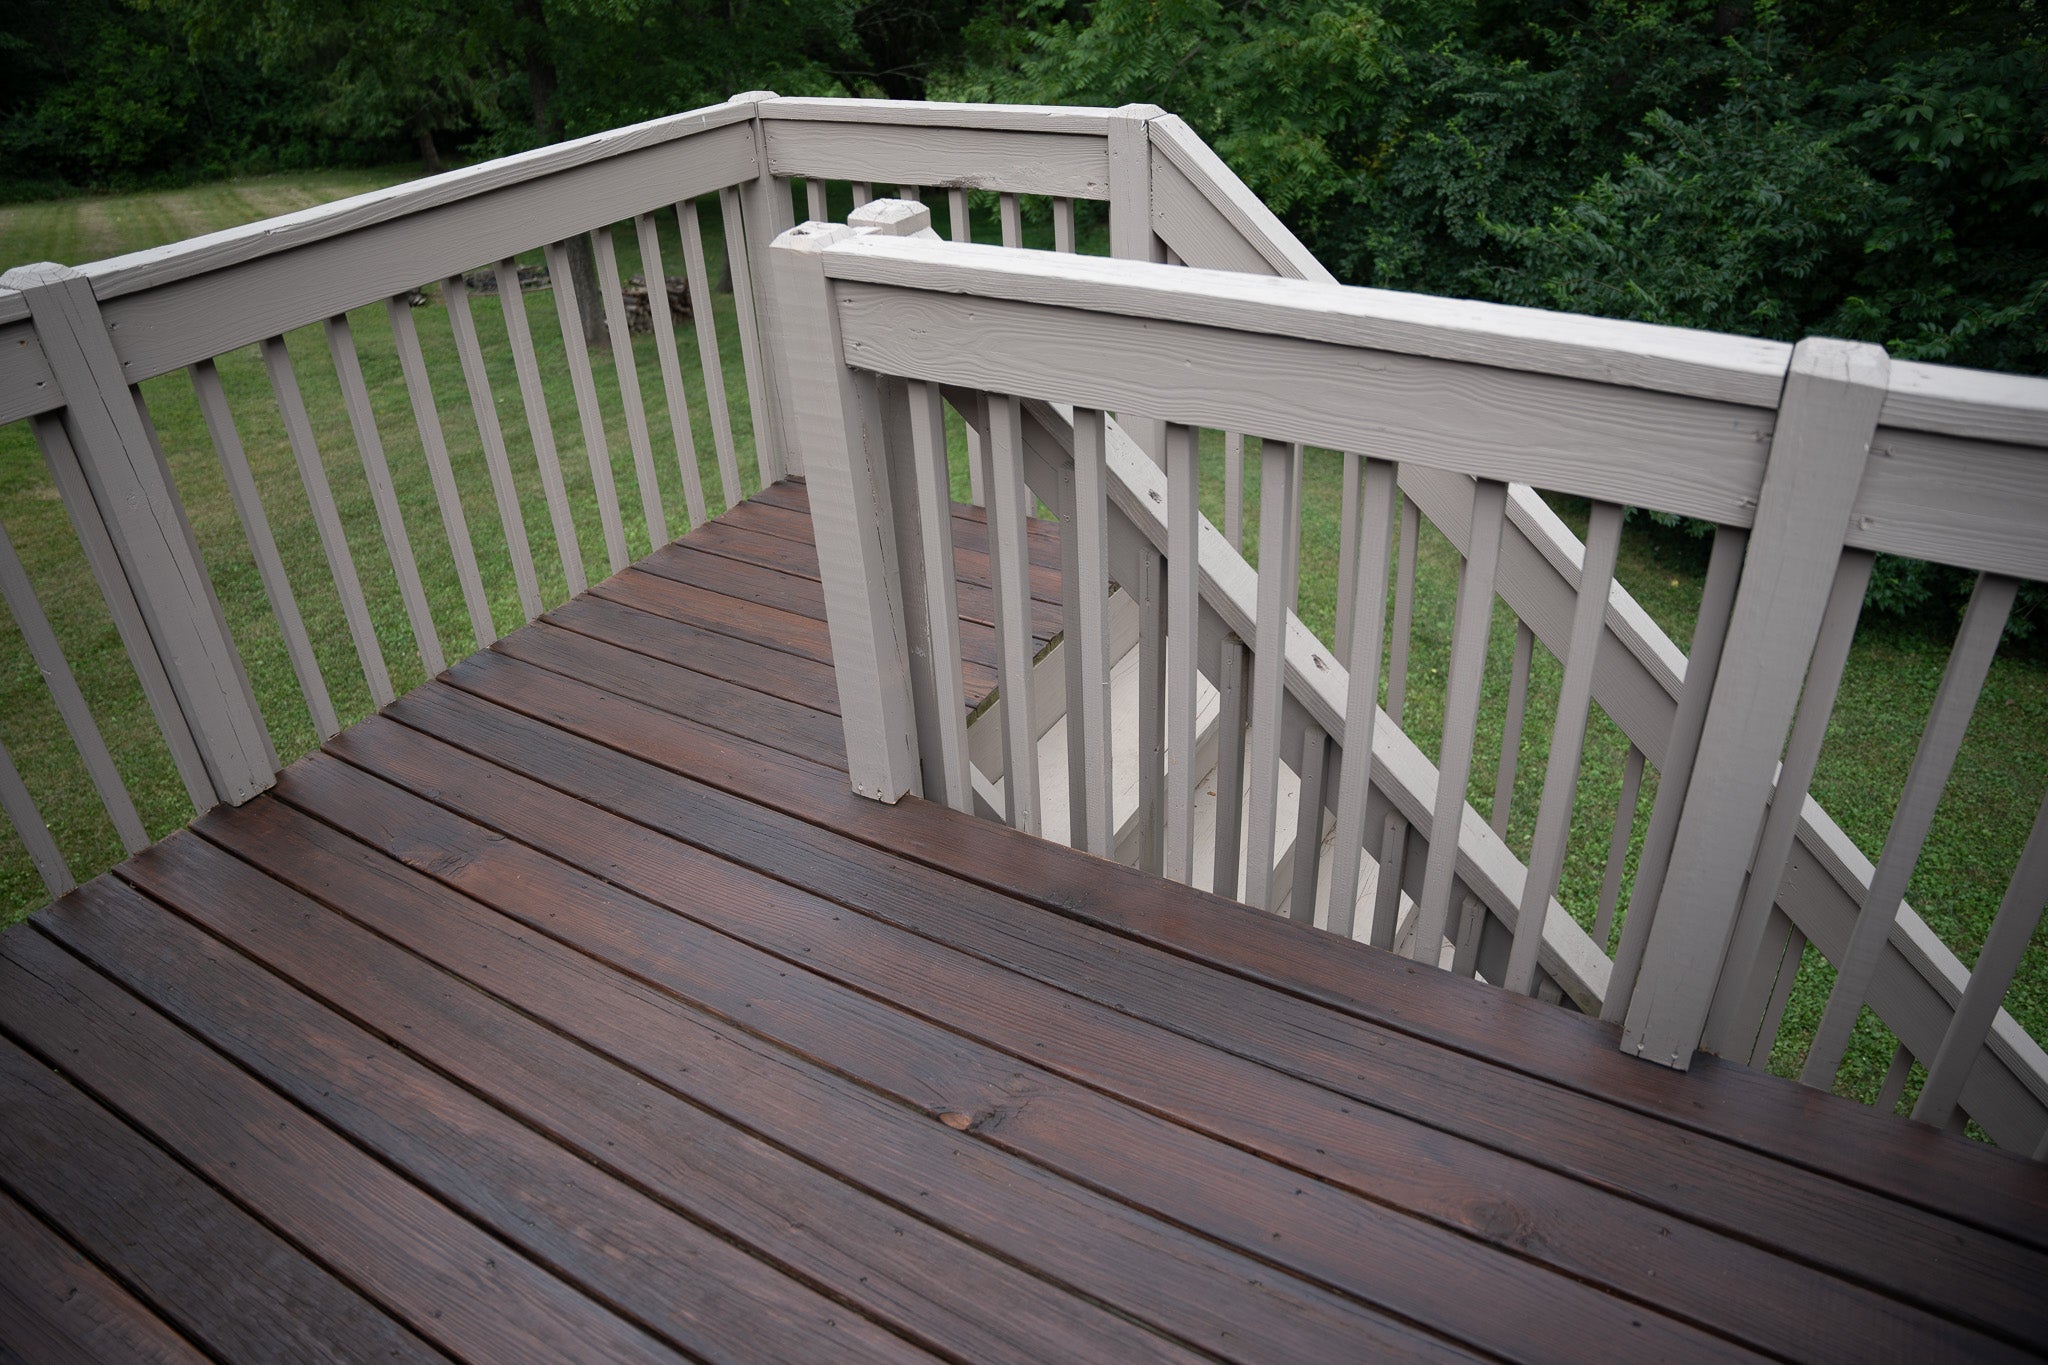 Enhance Your Deck With a Two Toned Look